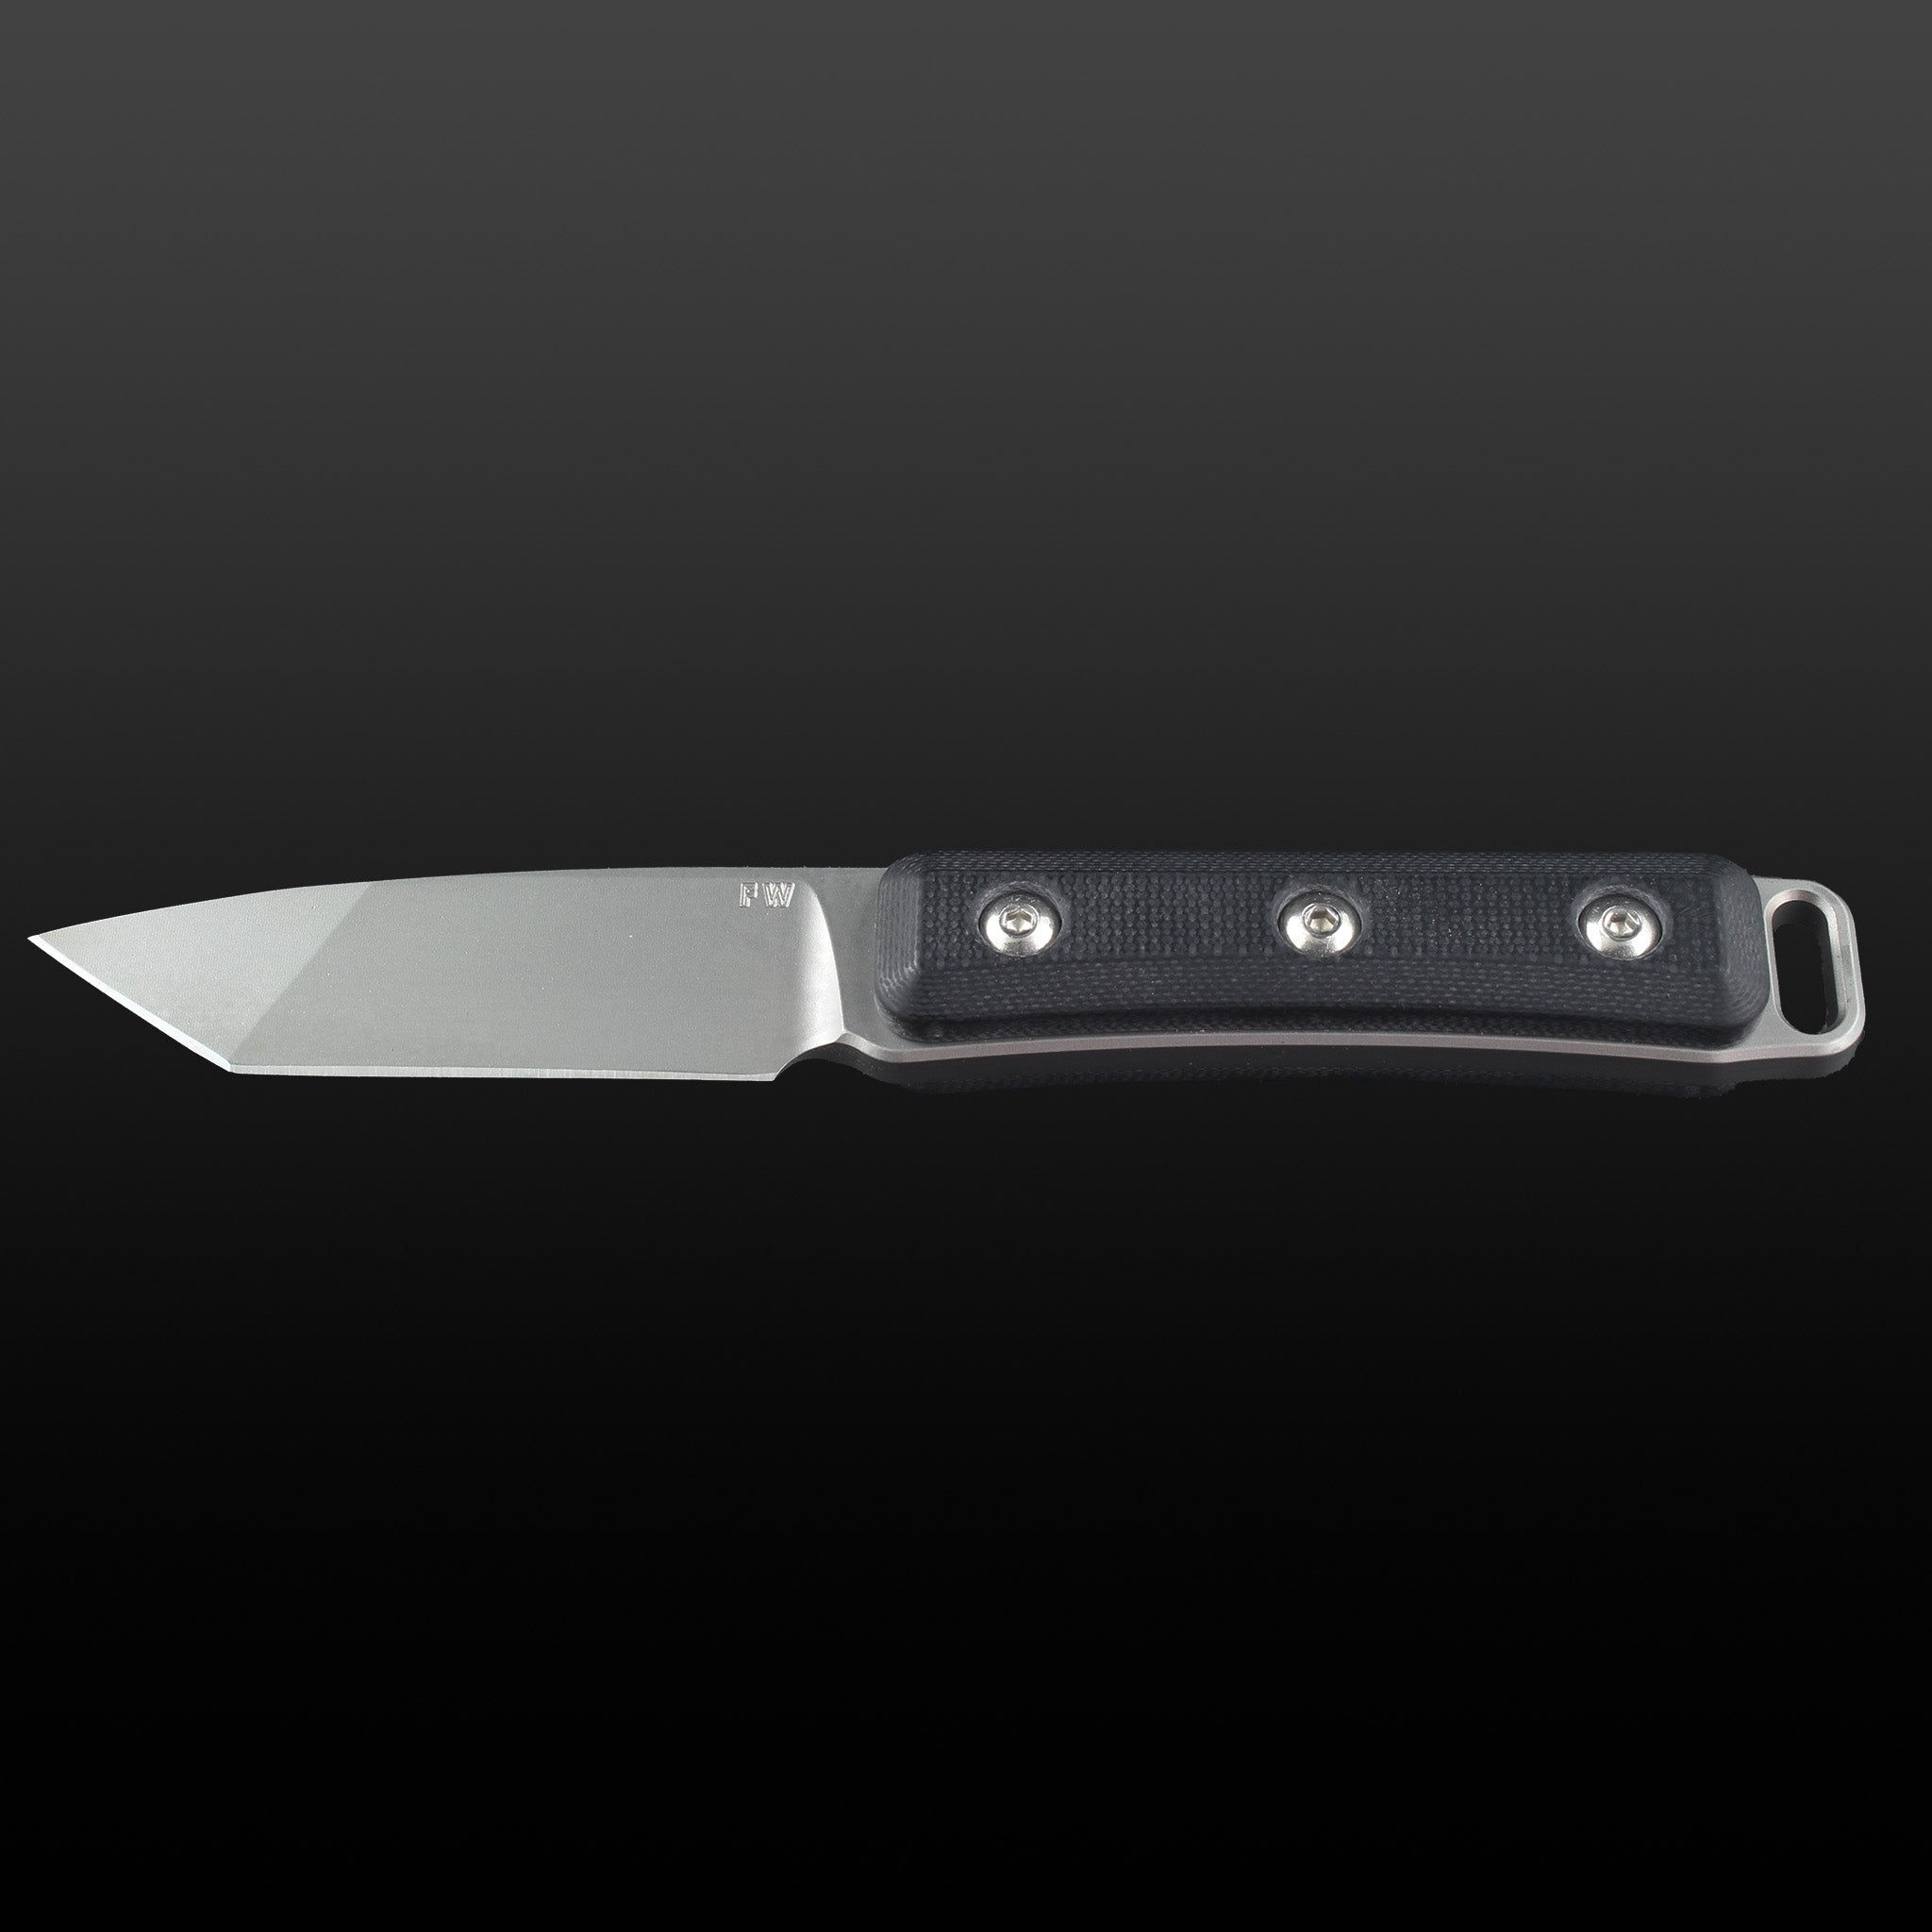 fixed tanto blade knife with black g10 handle scales and stainless steel hardware.  showing left side with FW logo engraved on the blade